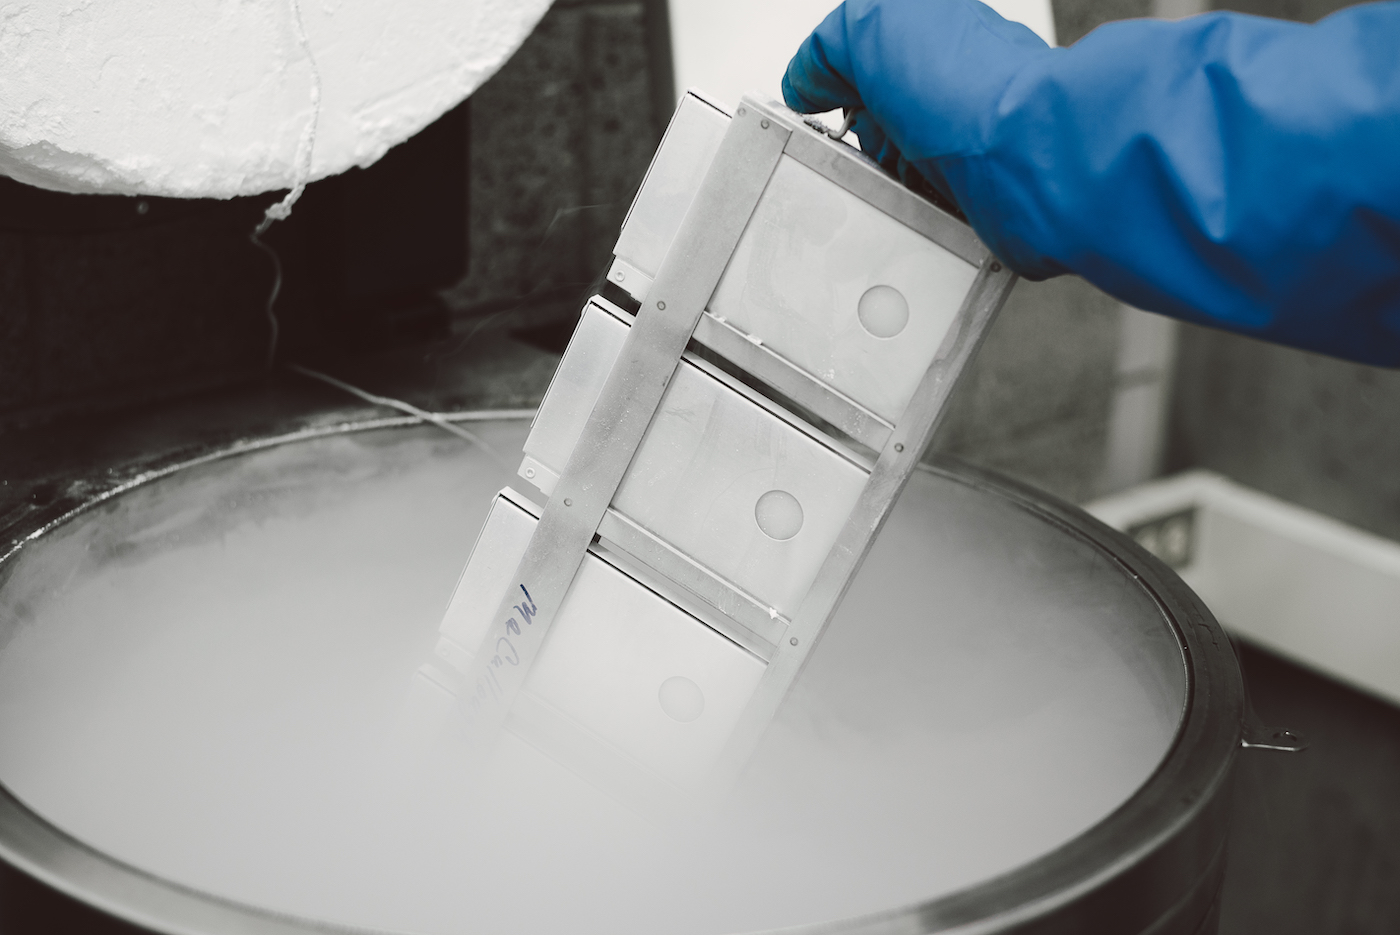 Cryopreserved samples being pulled out of cryogenic storage